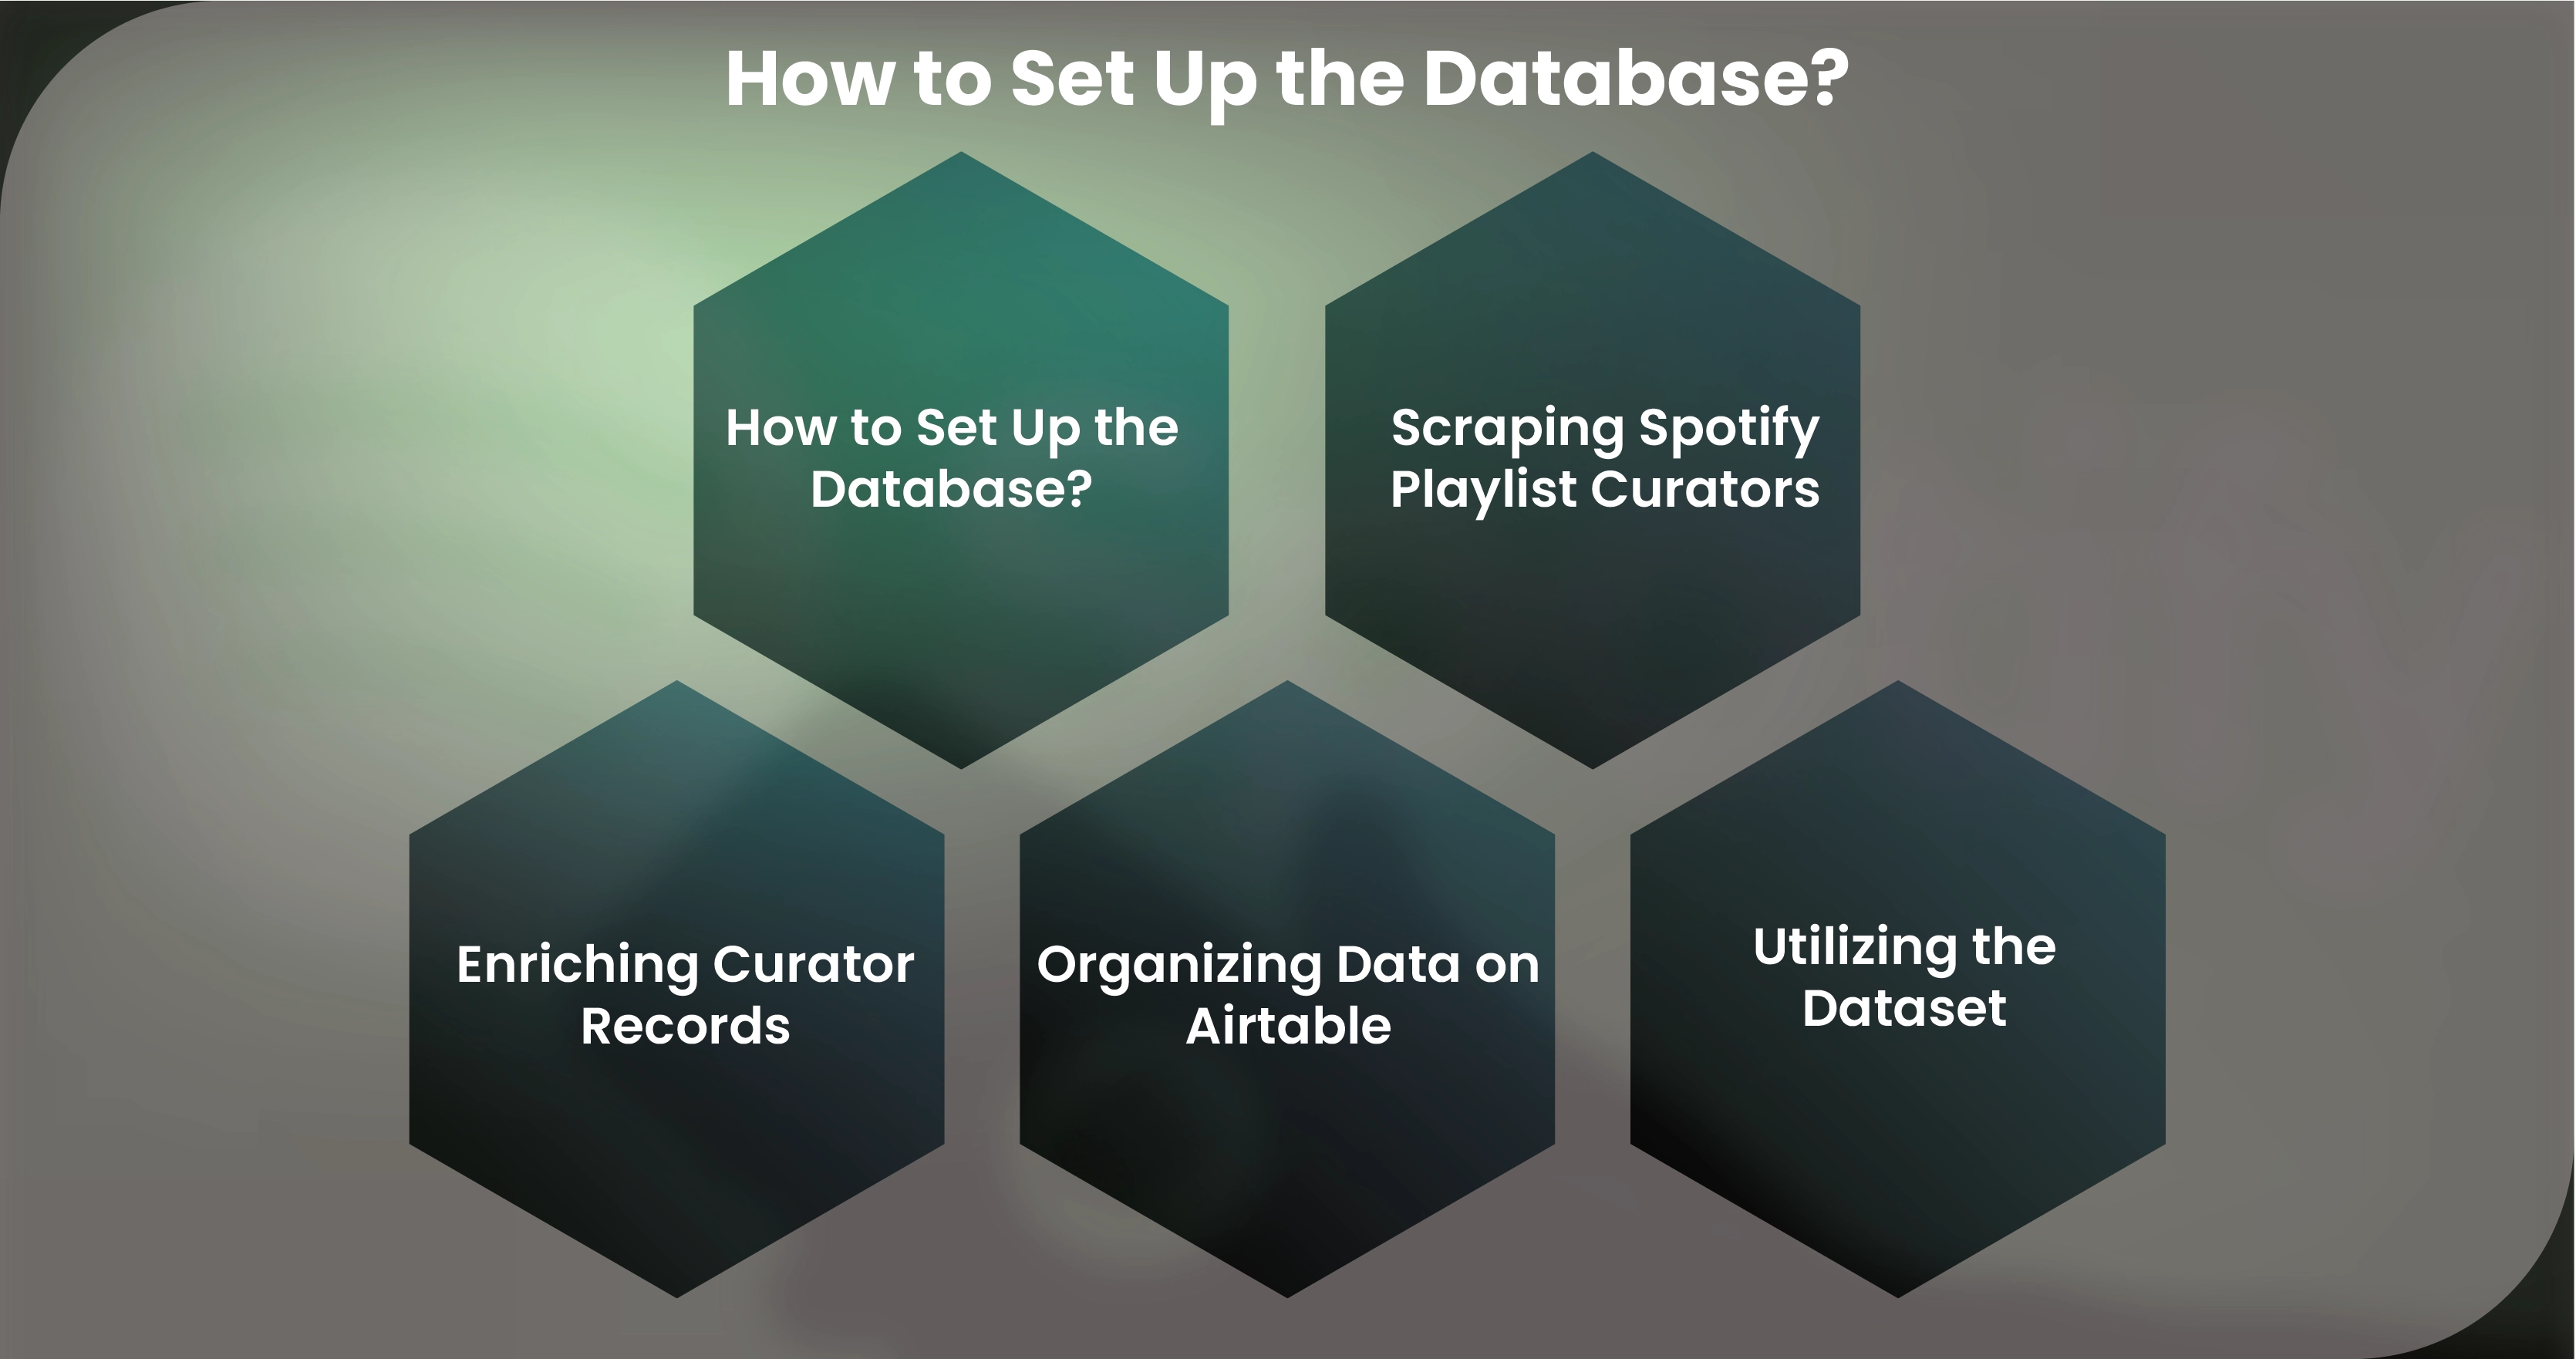 scrape-spotify-playlist-curators-data-guide/How-to-Set-Up-the-Database-01